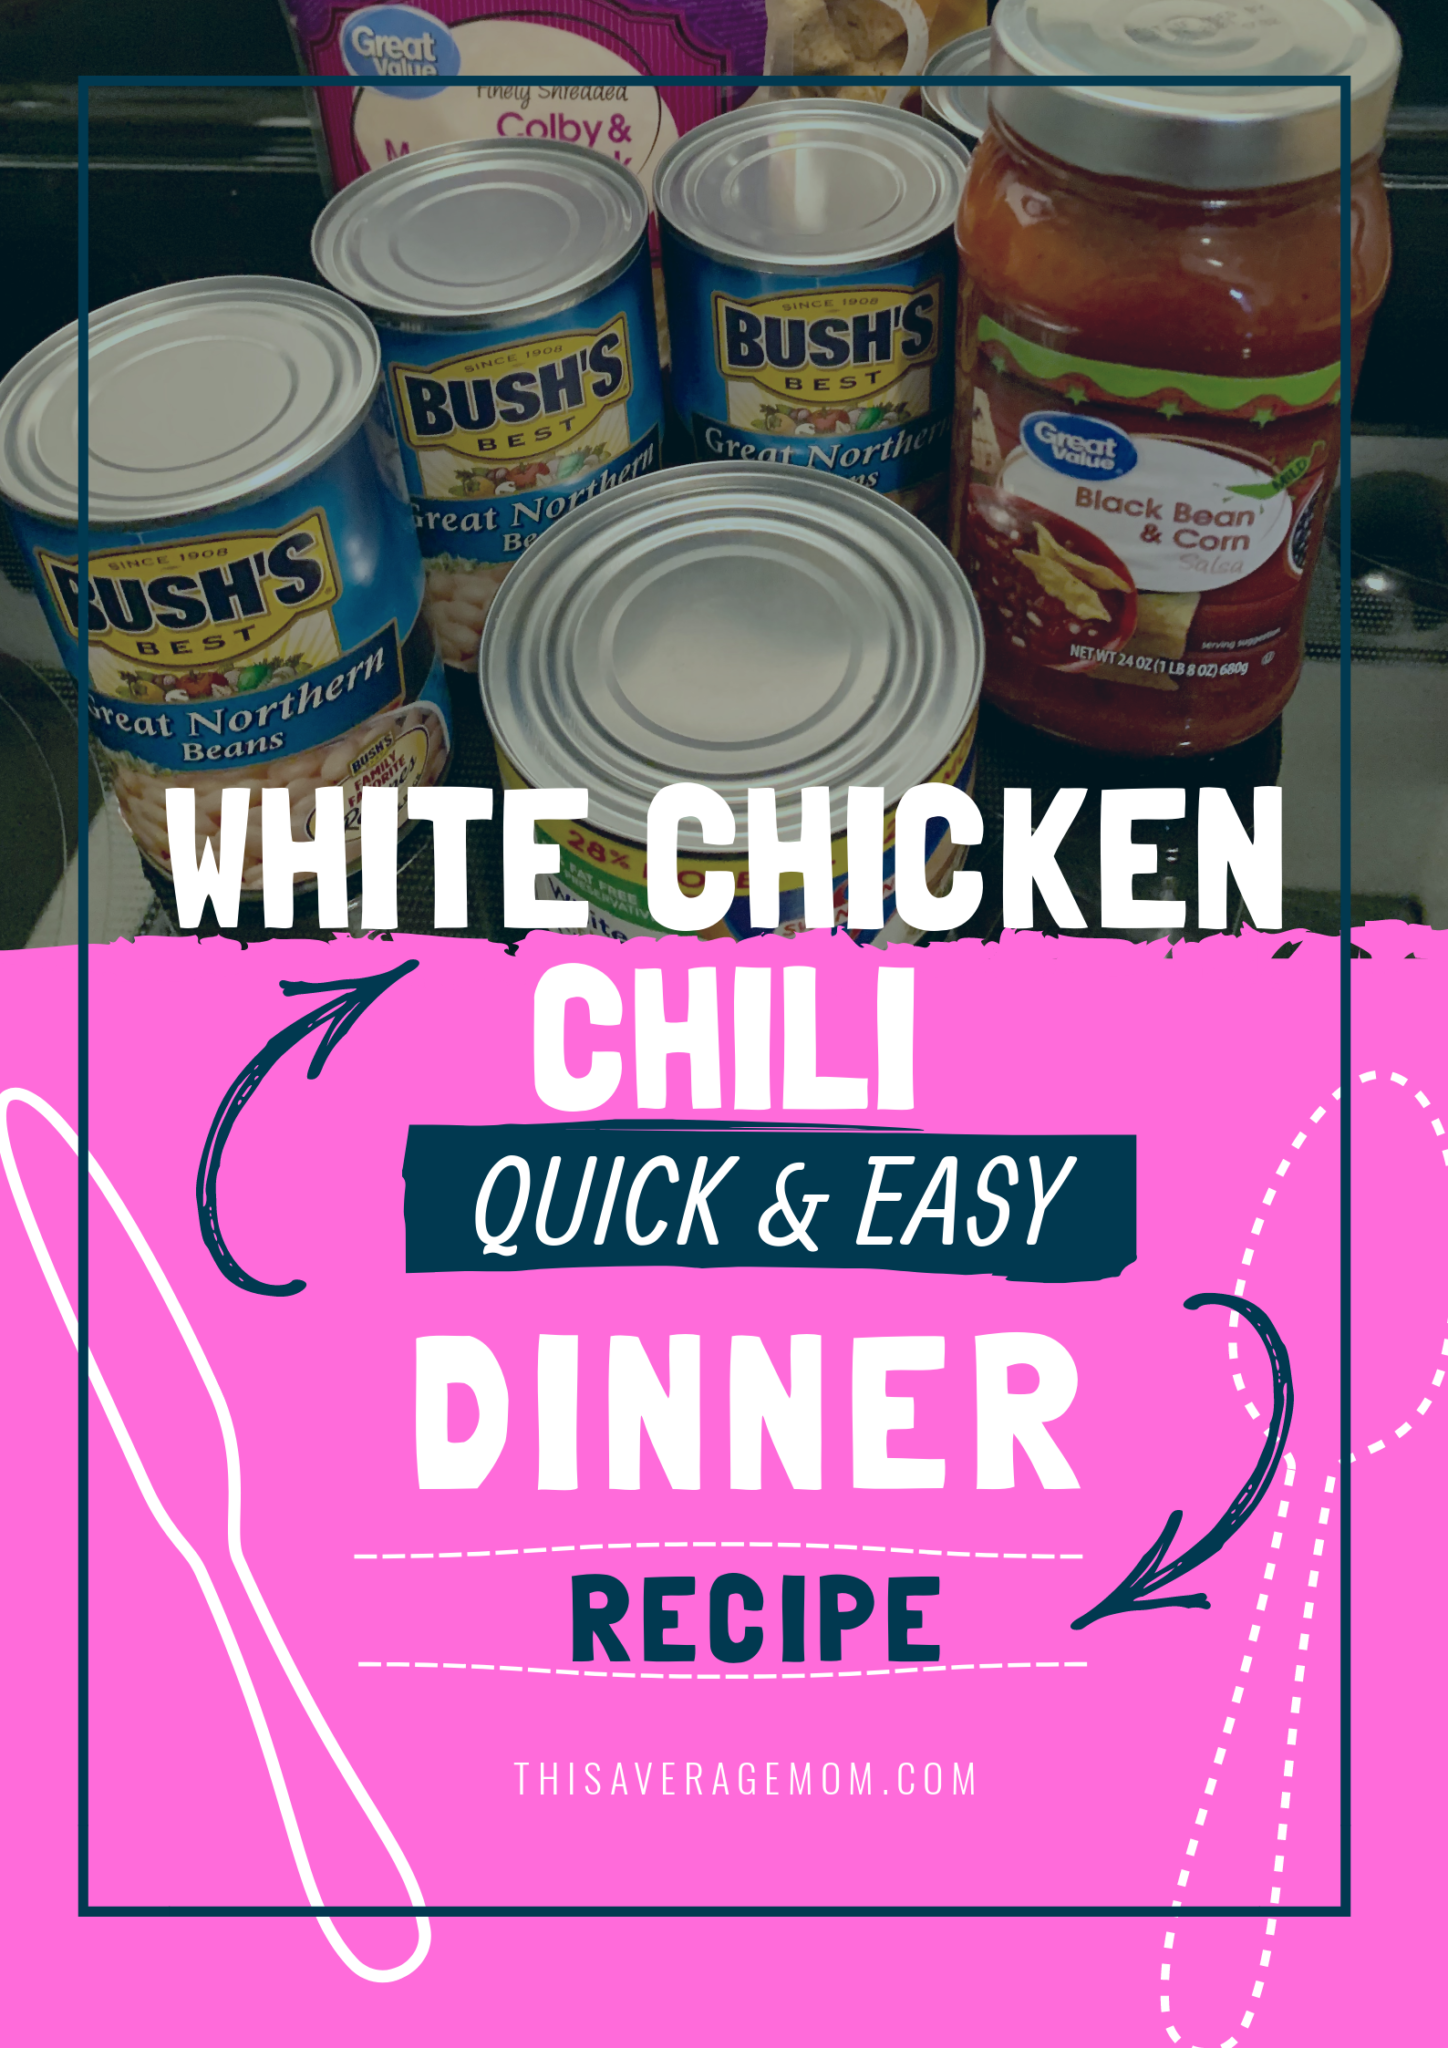 Need an easy dinner idea? Here’s the recipe for white chicken chili. Make this in about 20 minutes with NO PREP. #recipes #easydinner